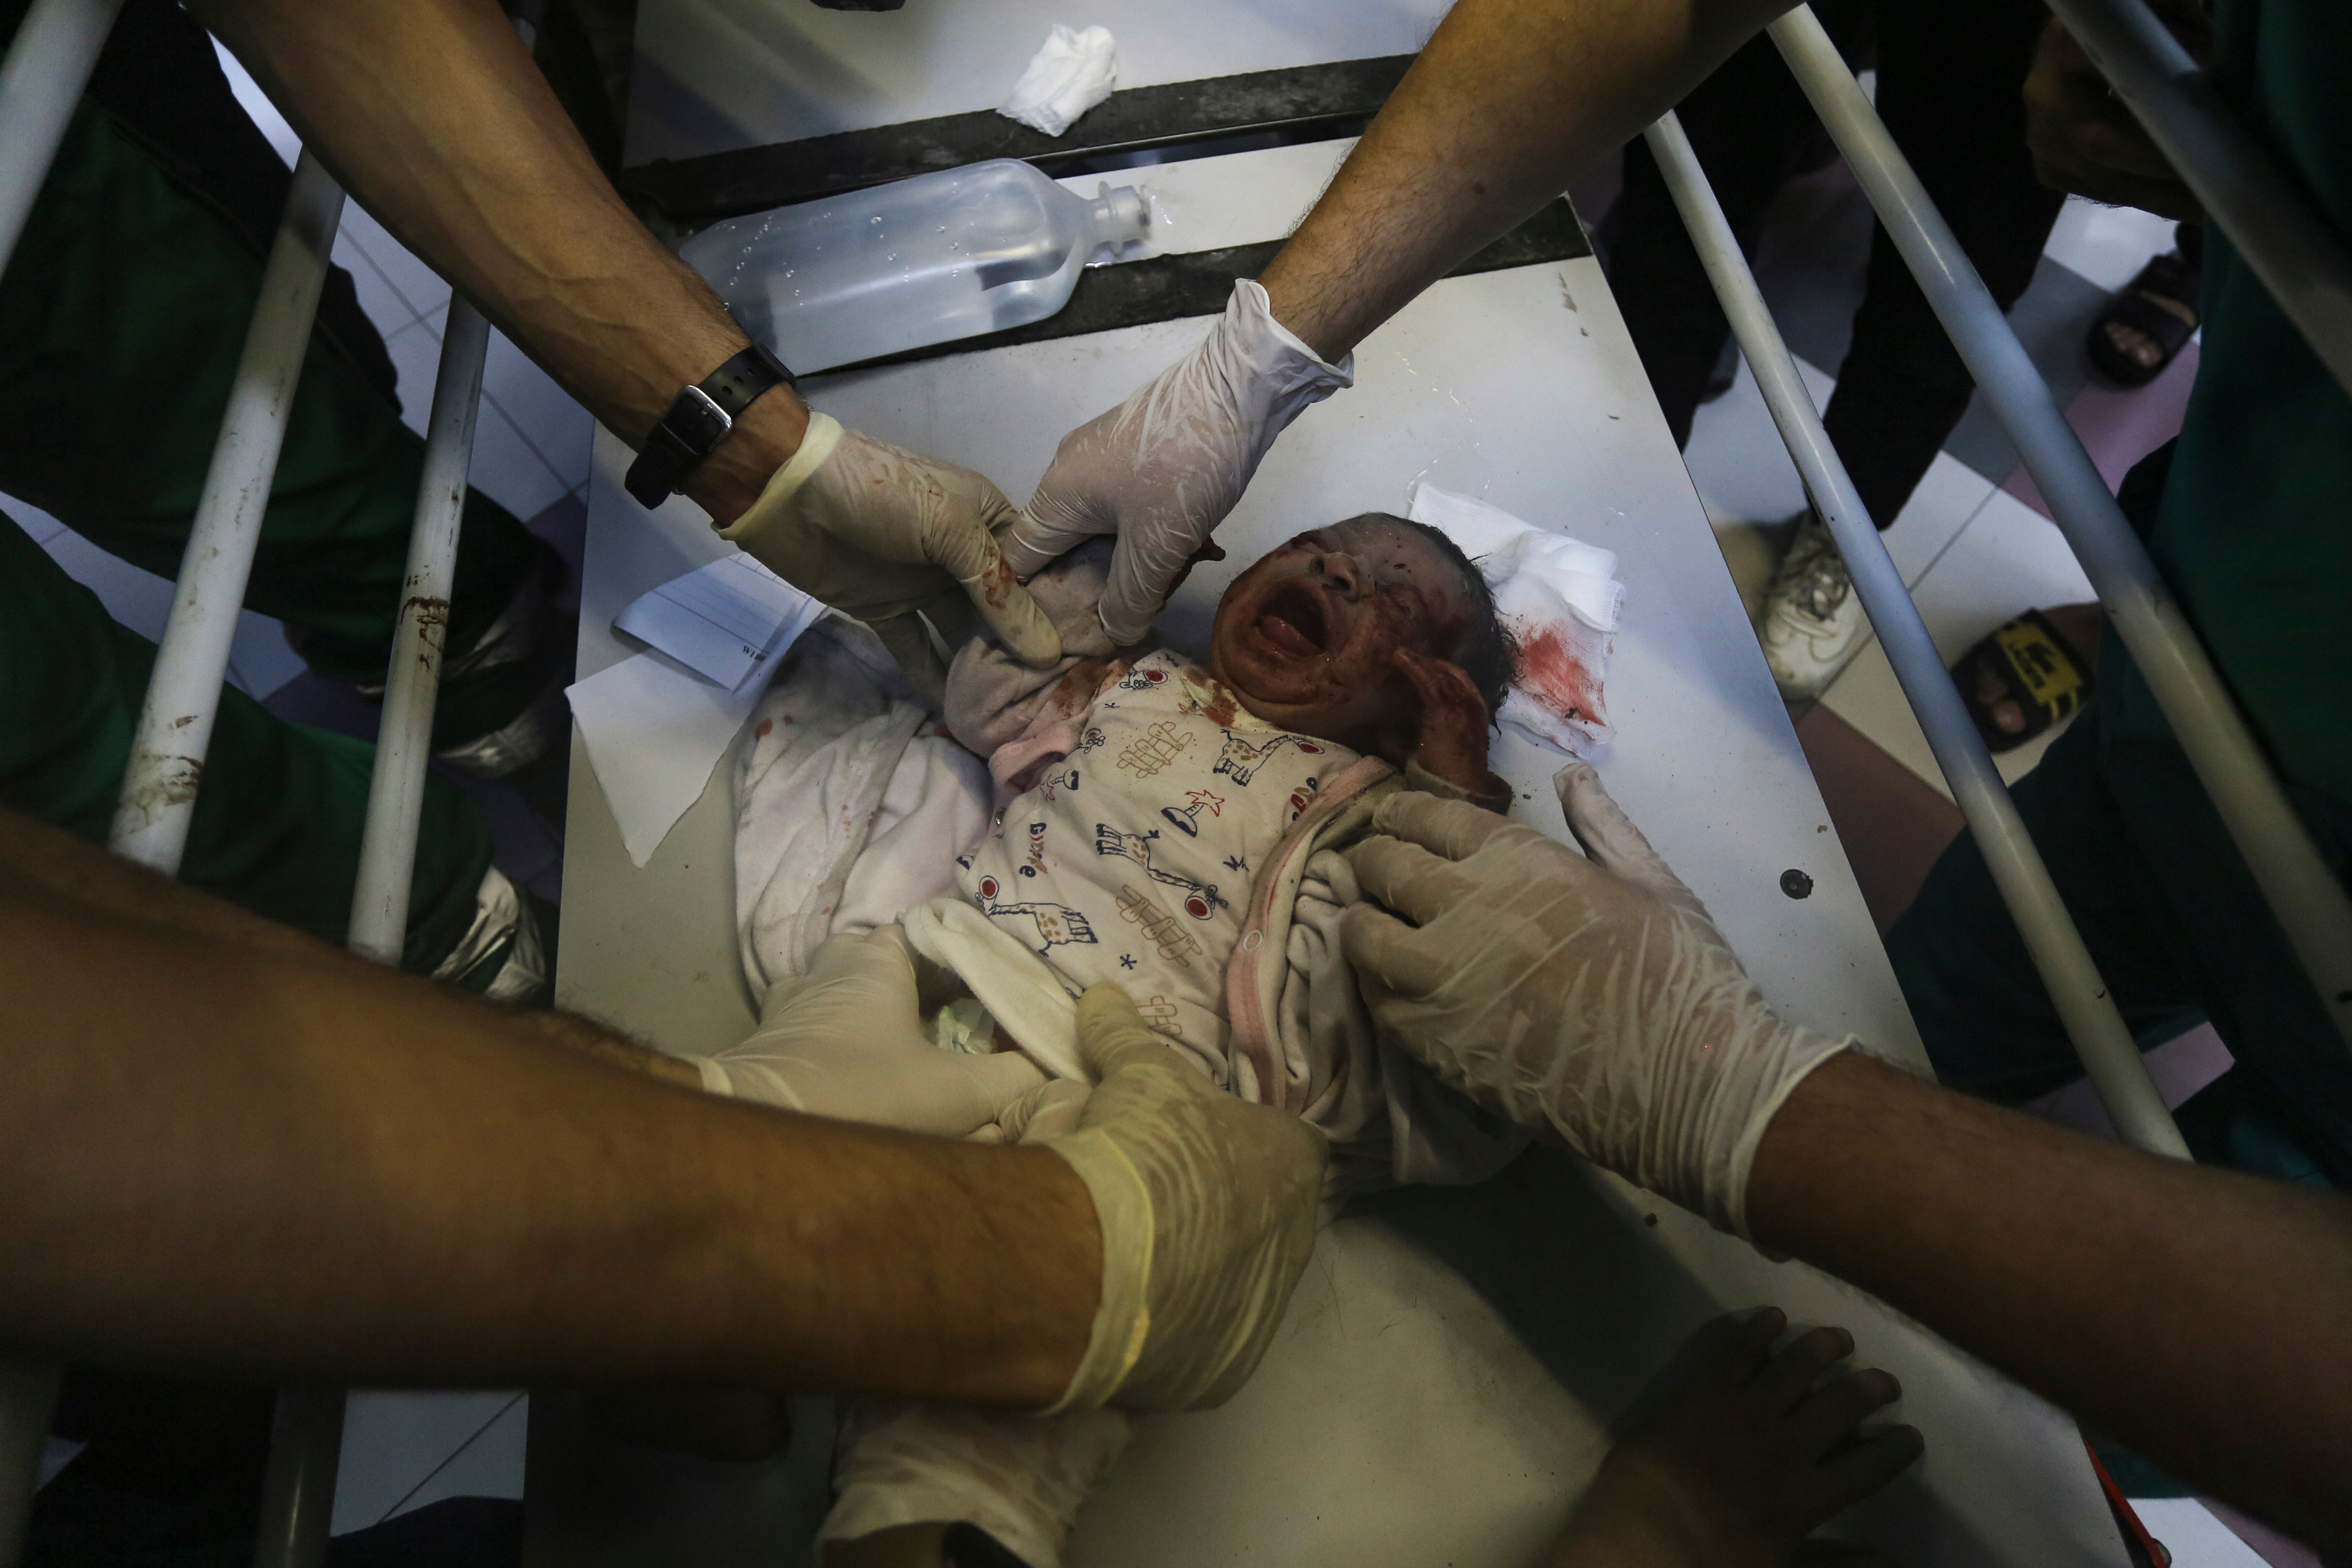 A wounded baby receives care at al-Shifa